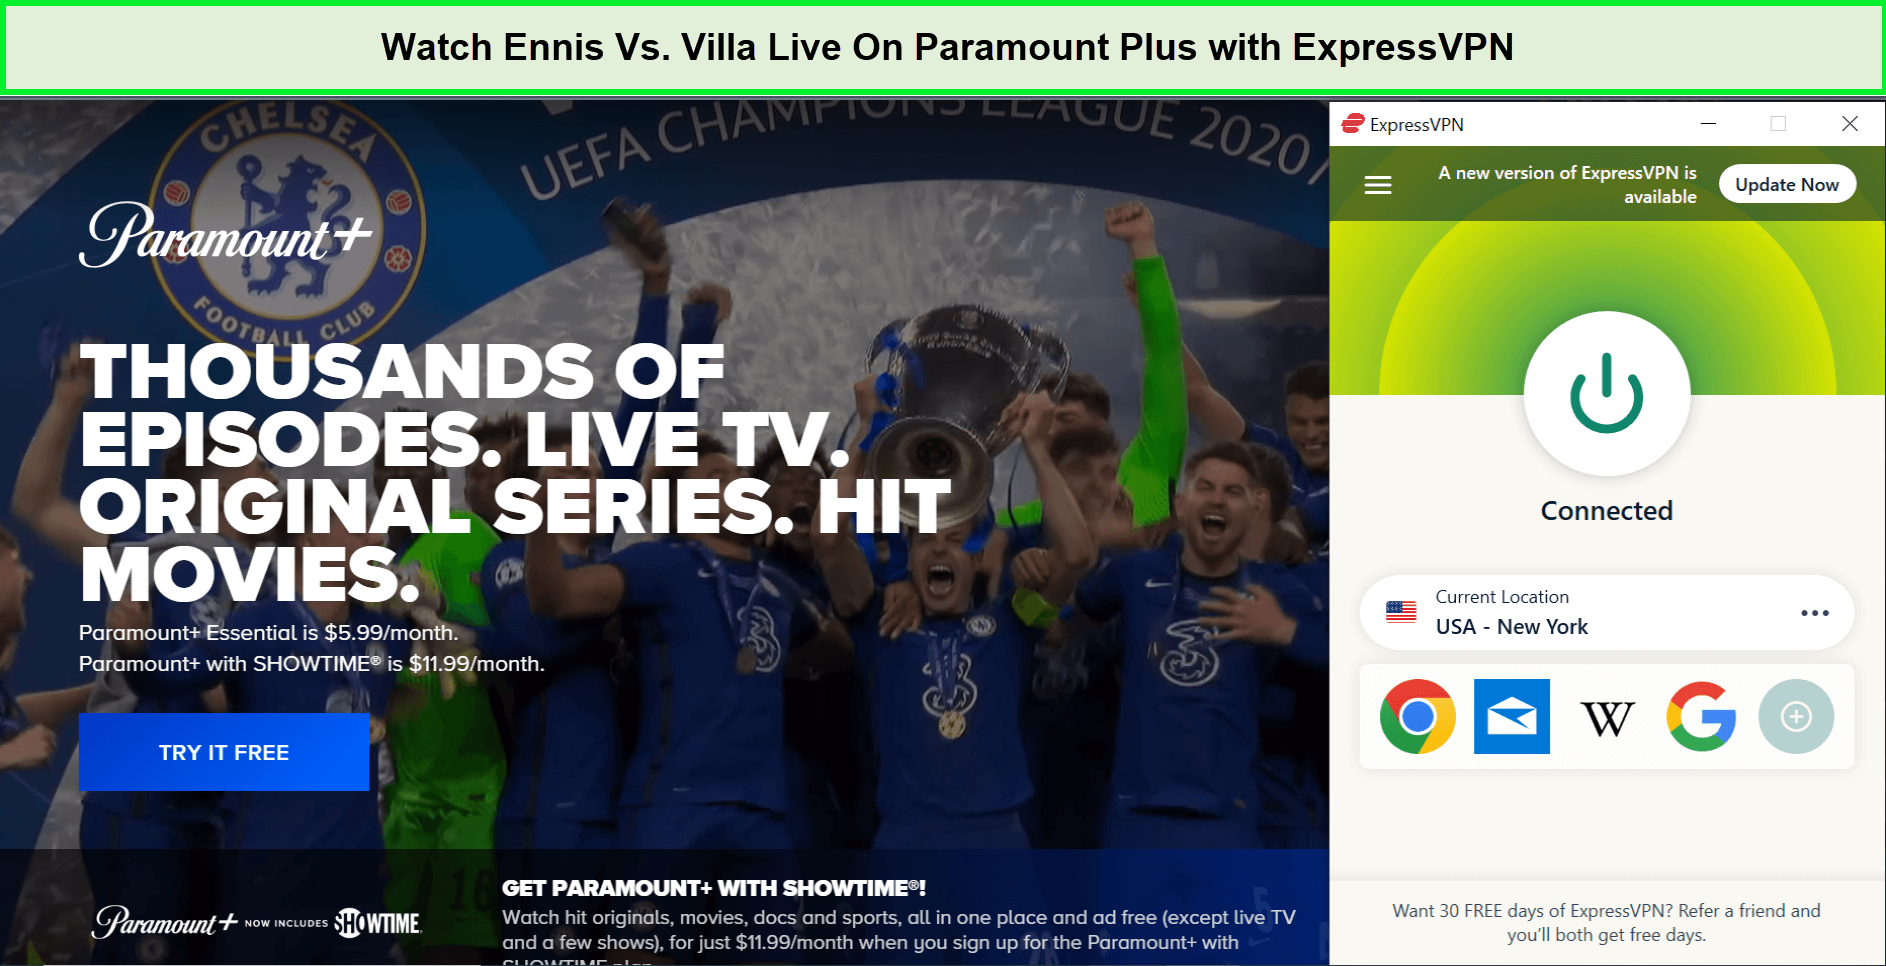 Watch-Ennis-Vs.-Villa-Live-in-Italy-On-Paramount-Plus-with-ExpressVPN